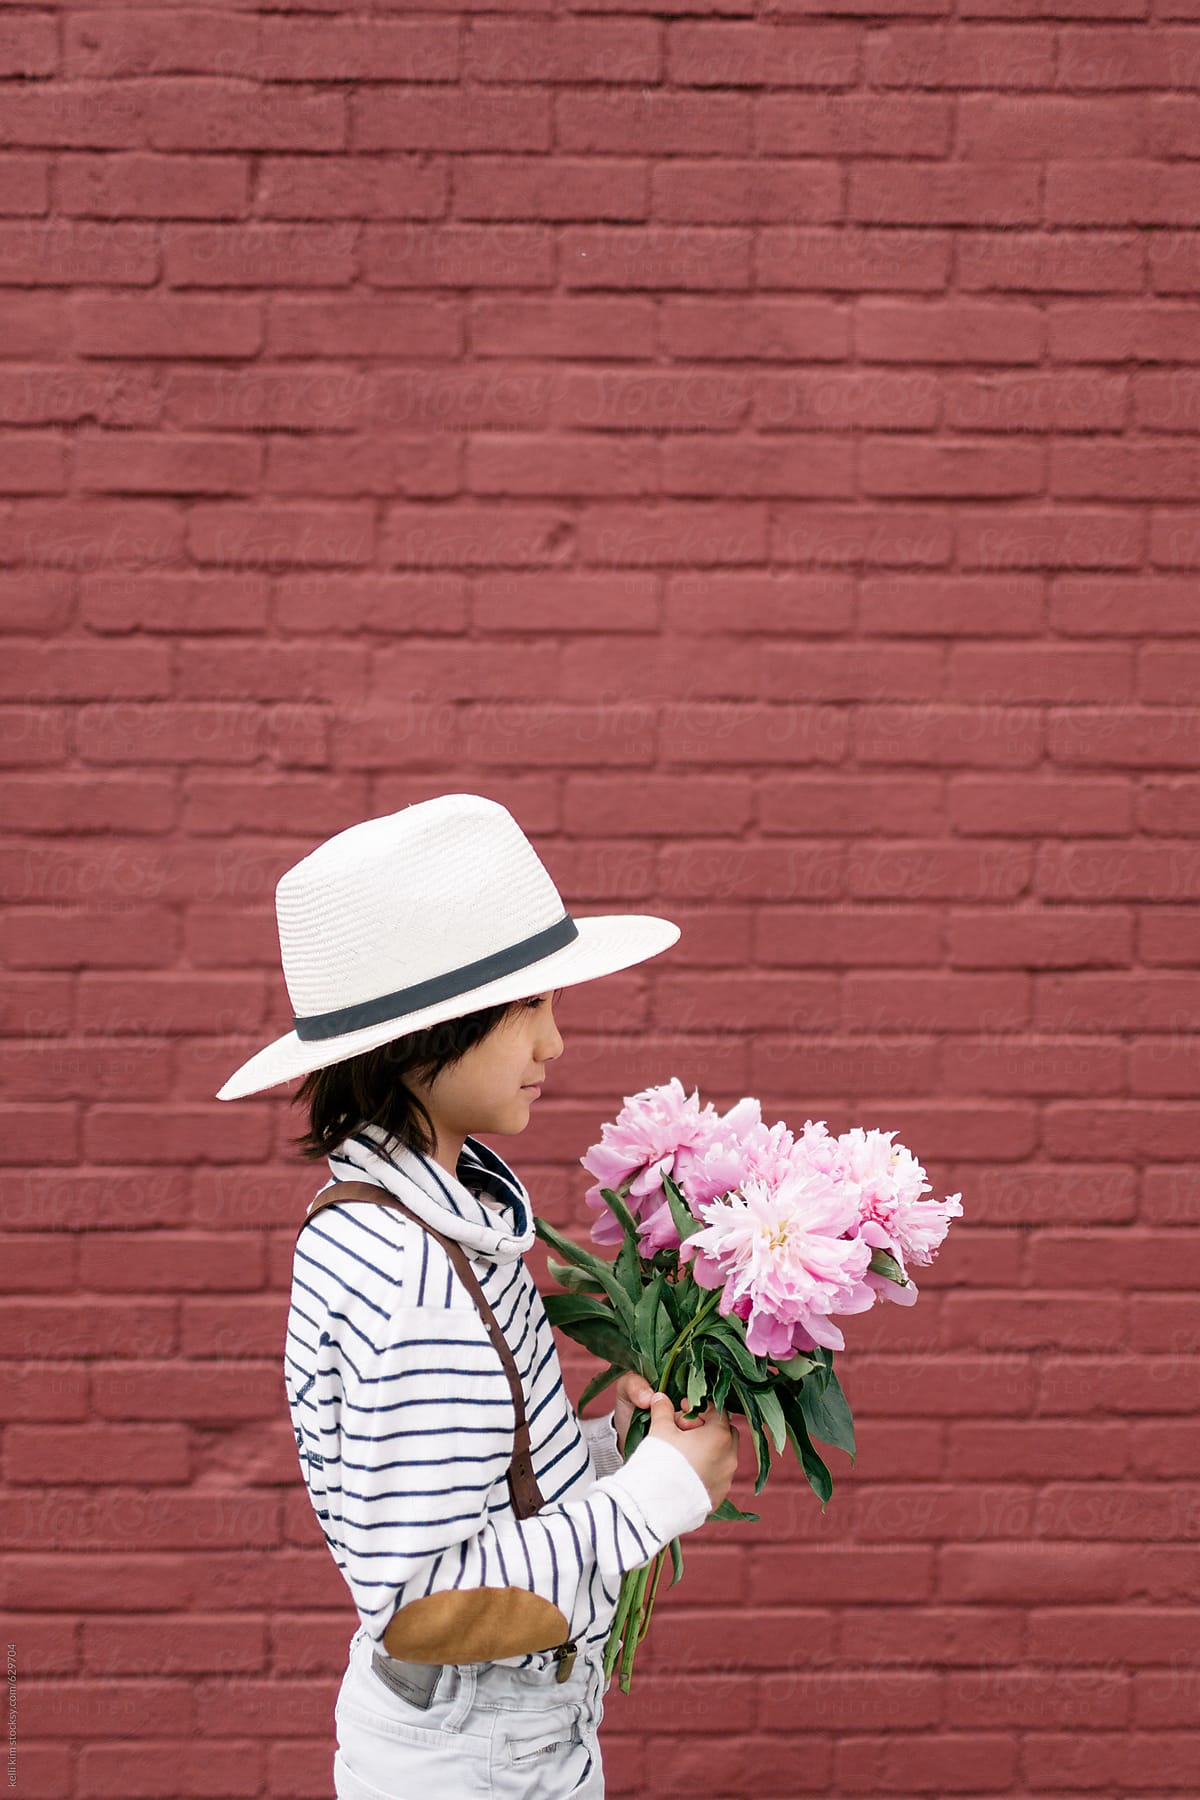 Cute mixed race boy holds pink flowers in front of brick wall